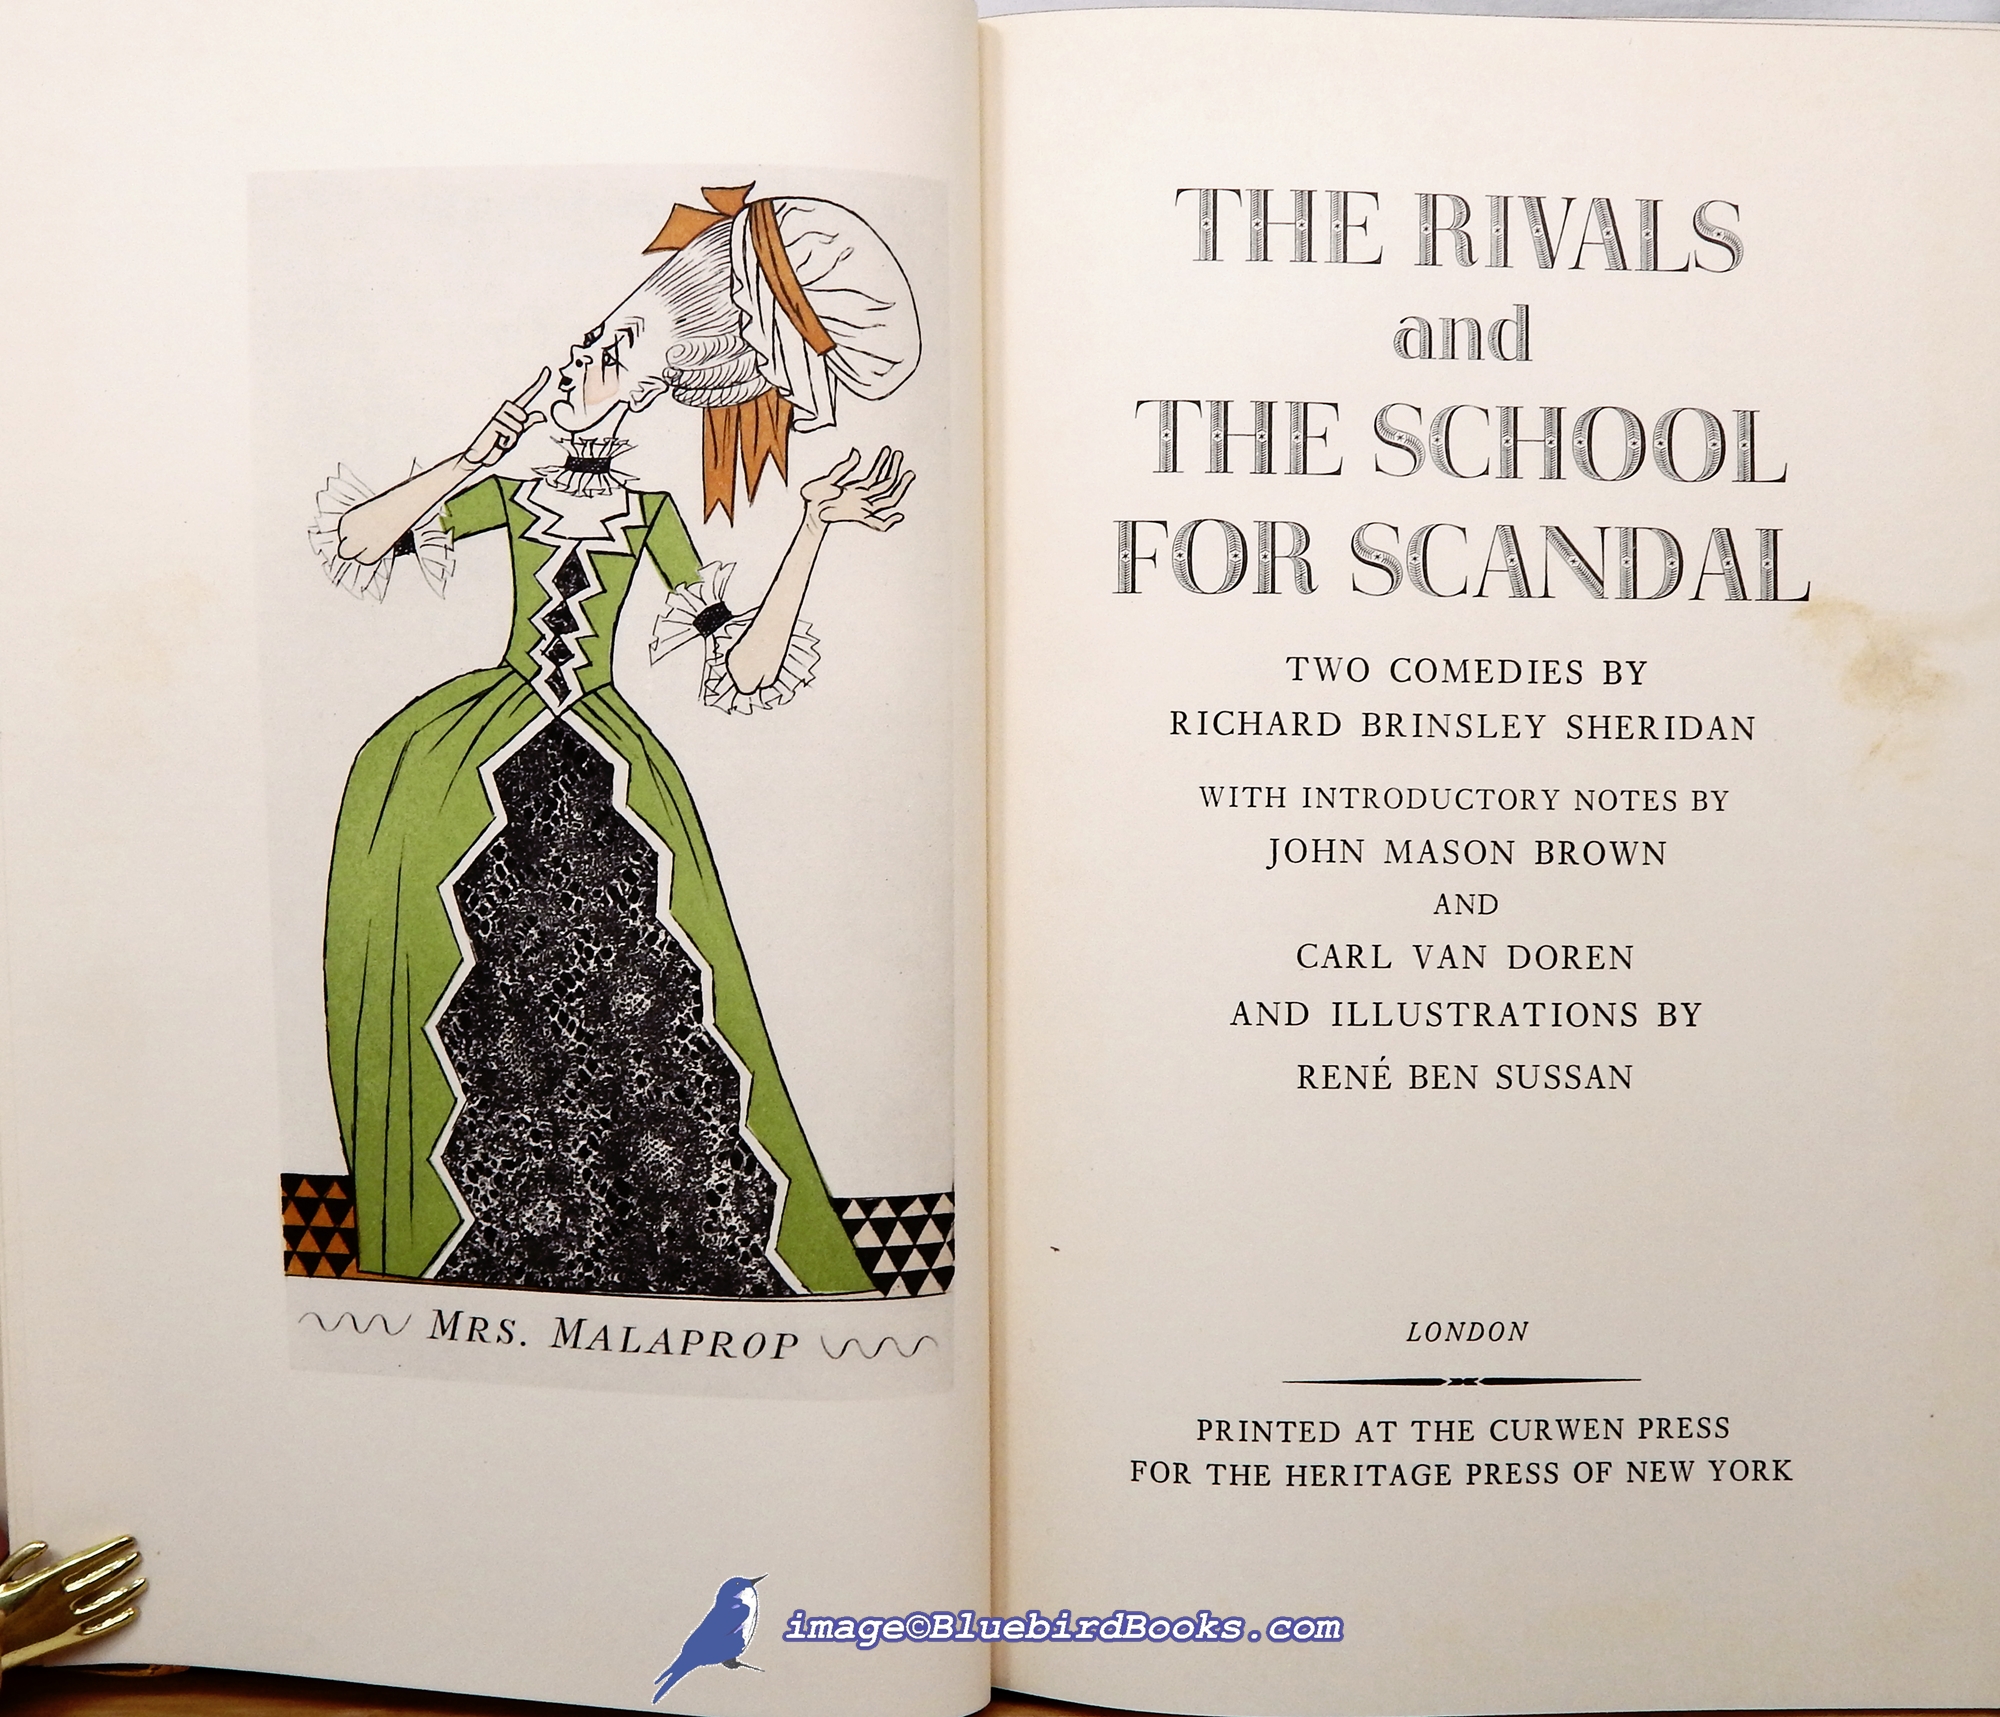 SHERIDAN, RICHARD BRINSLEY - The Rivals -and- the School for Scandal (Two Comedies)